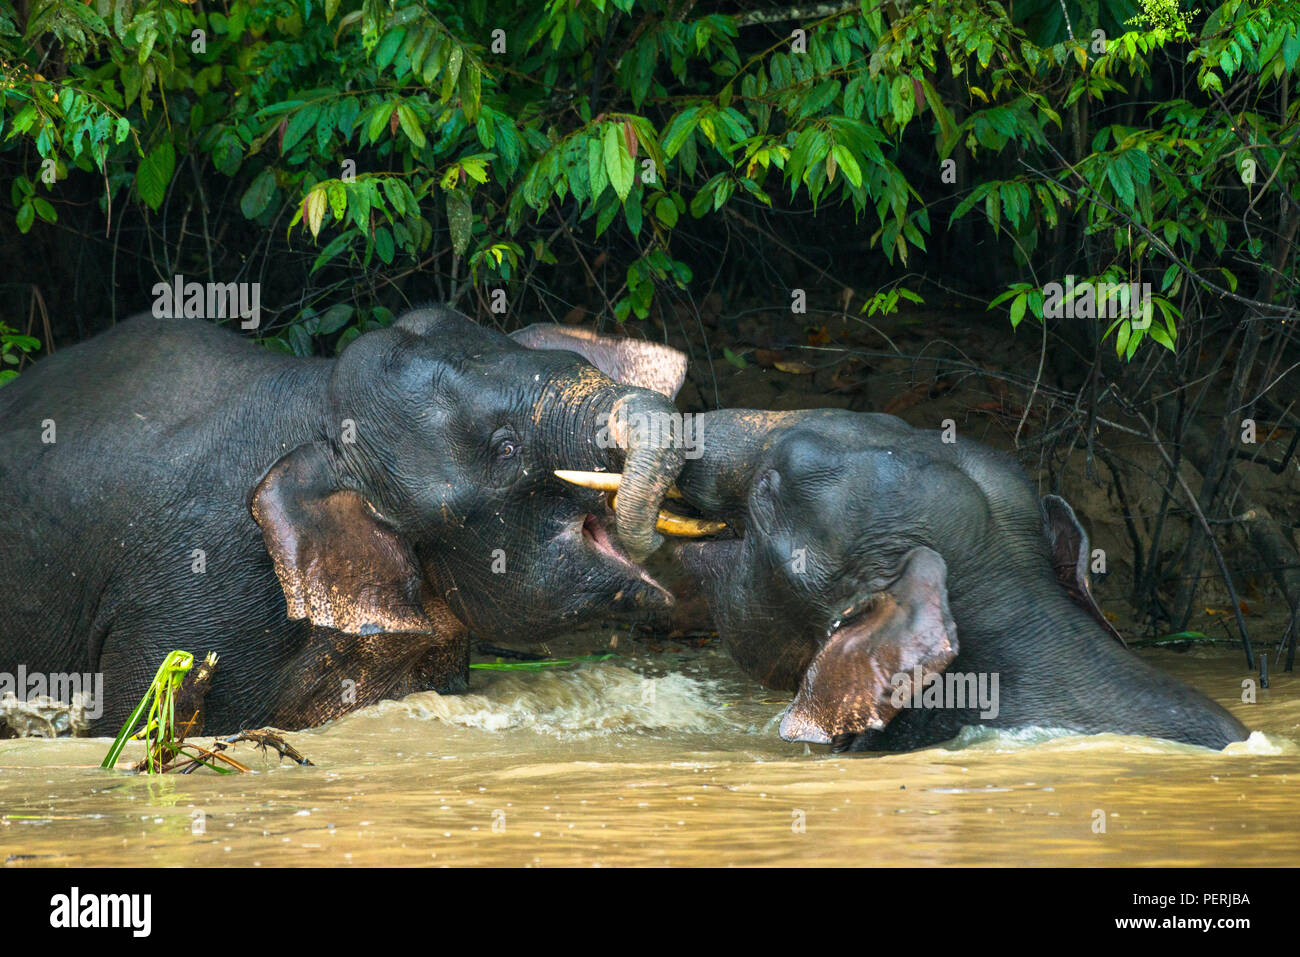 A pair of young male Borneo pygmy elephants playing in the water in Kinabatangan River in Sabah, Malaysia (Borneo). Stock Photo